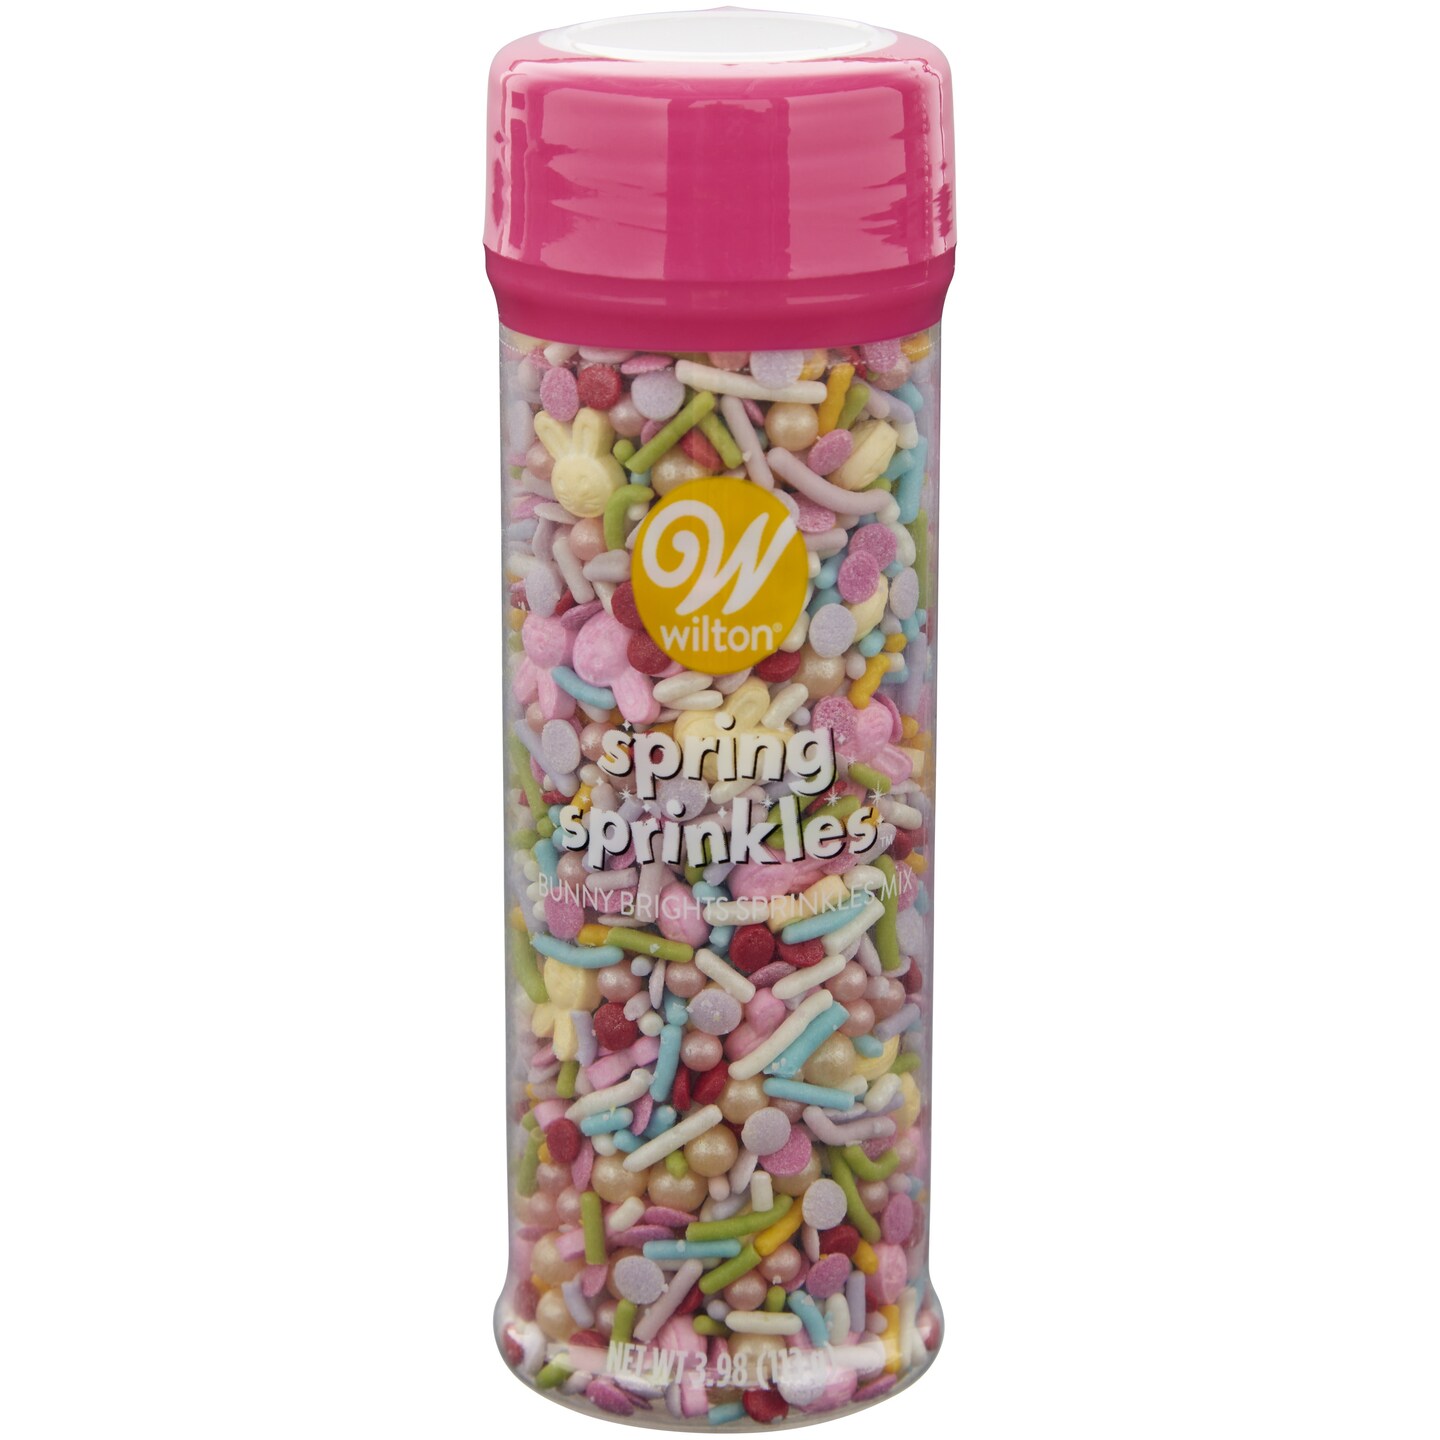 Wilton Sprinkles Mix-Easter Bright Bunny